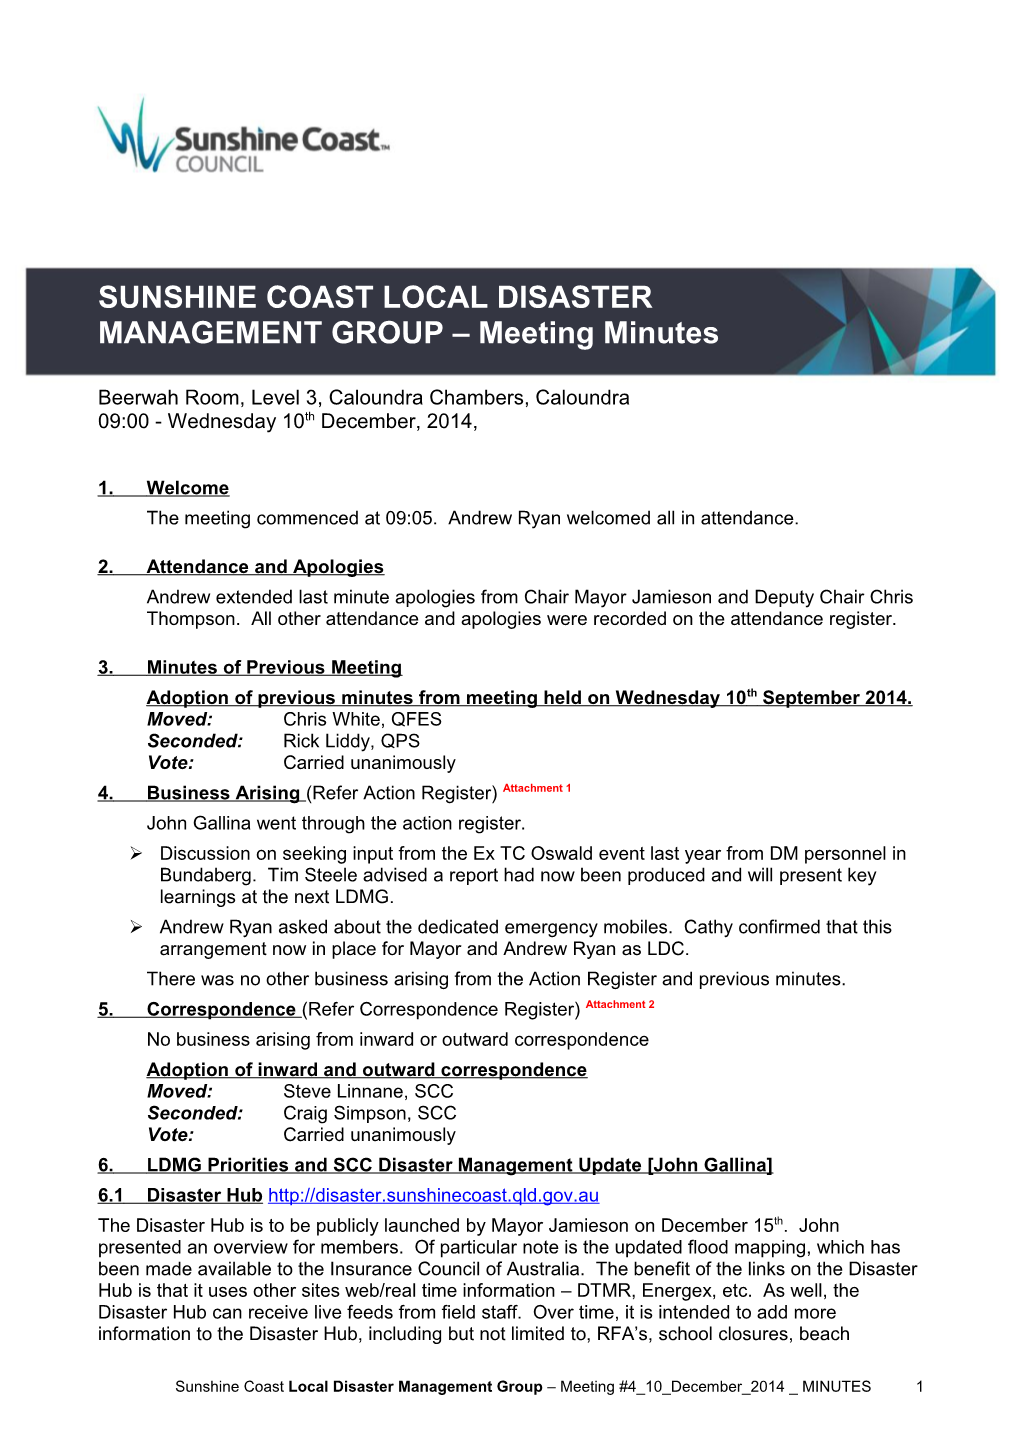 SUNSHINE COAST LOCAL DISASTER MANAGEMENT GROUP Meeting Minutes